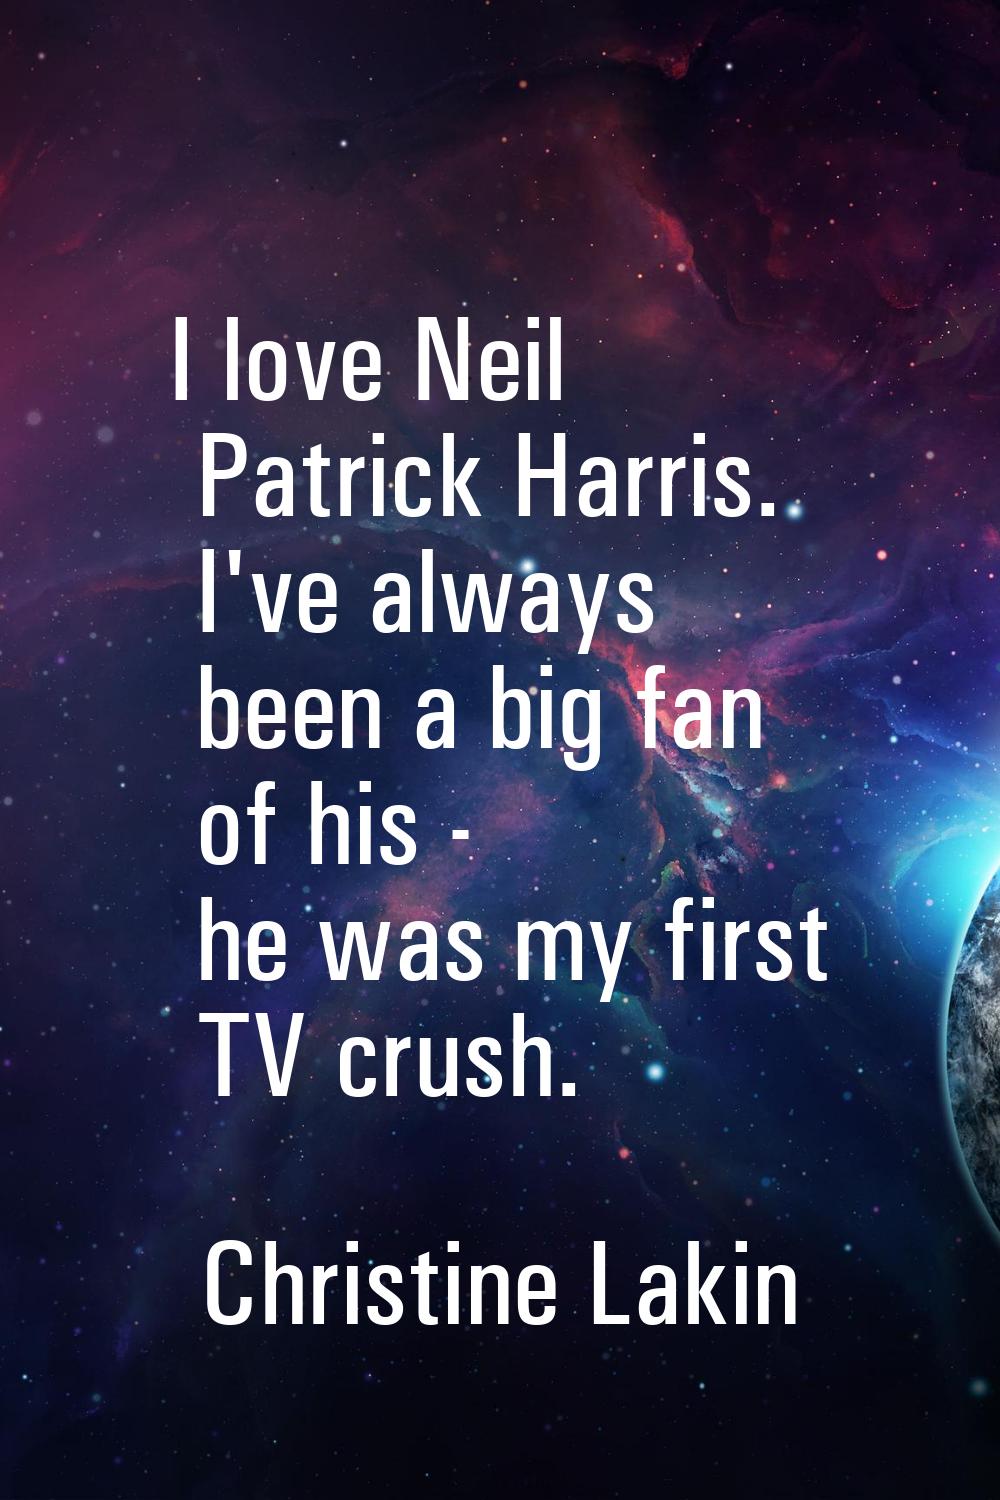 I love Neil Patrick Harris. I've always been a big fan of his - he was my first TV crush.